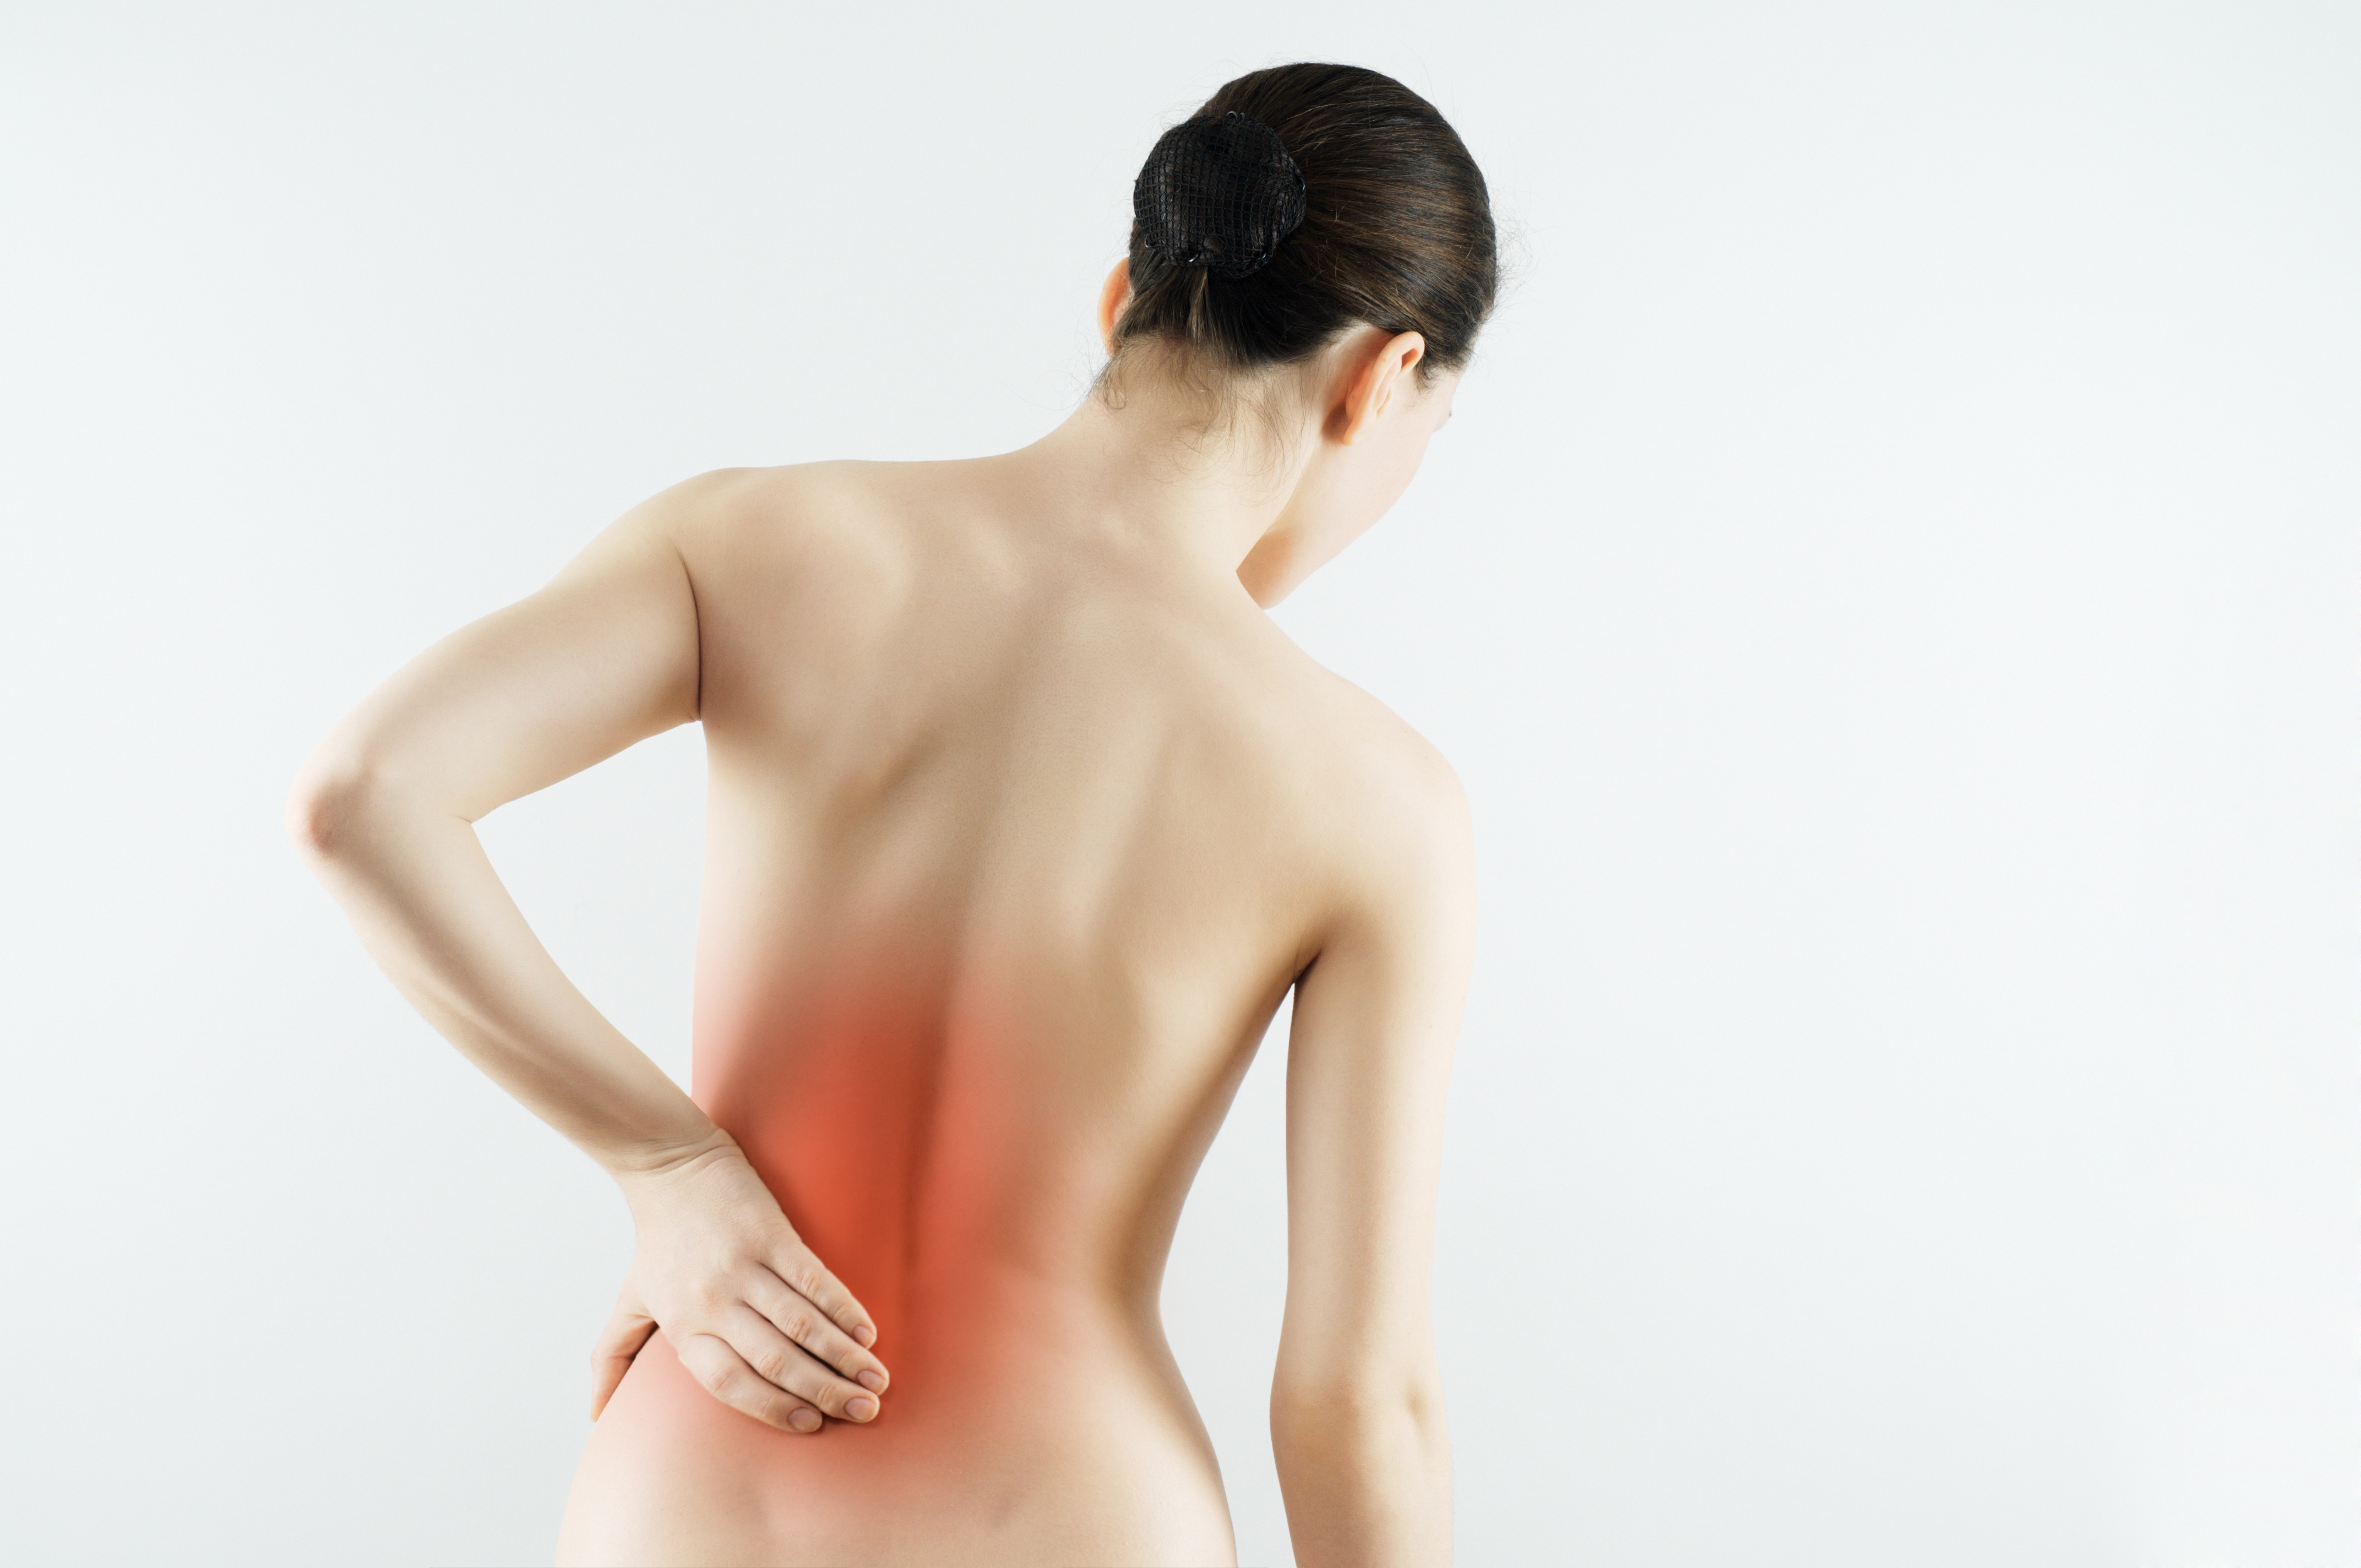 How Can I Help My Back Pain?